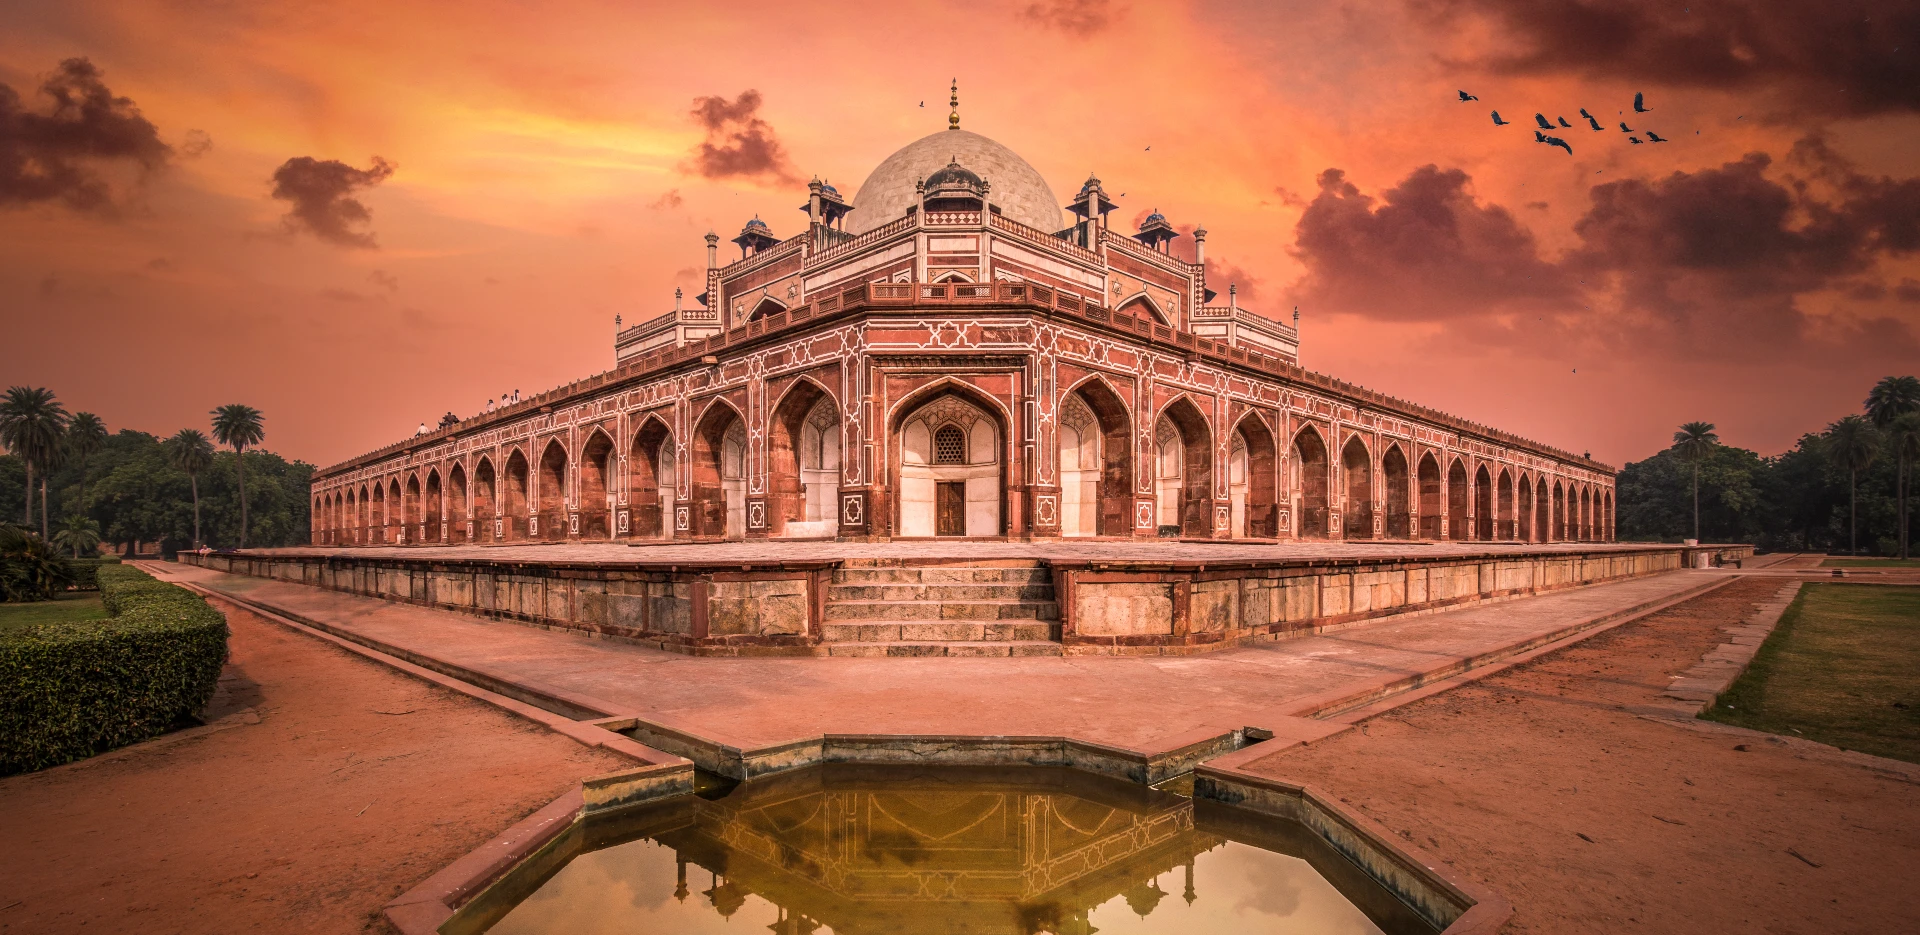 Mughal monuments in India